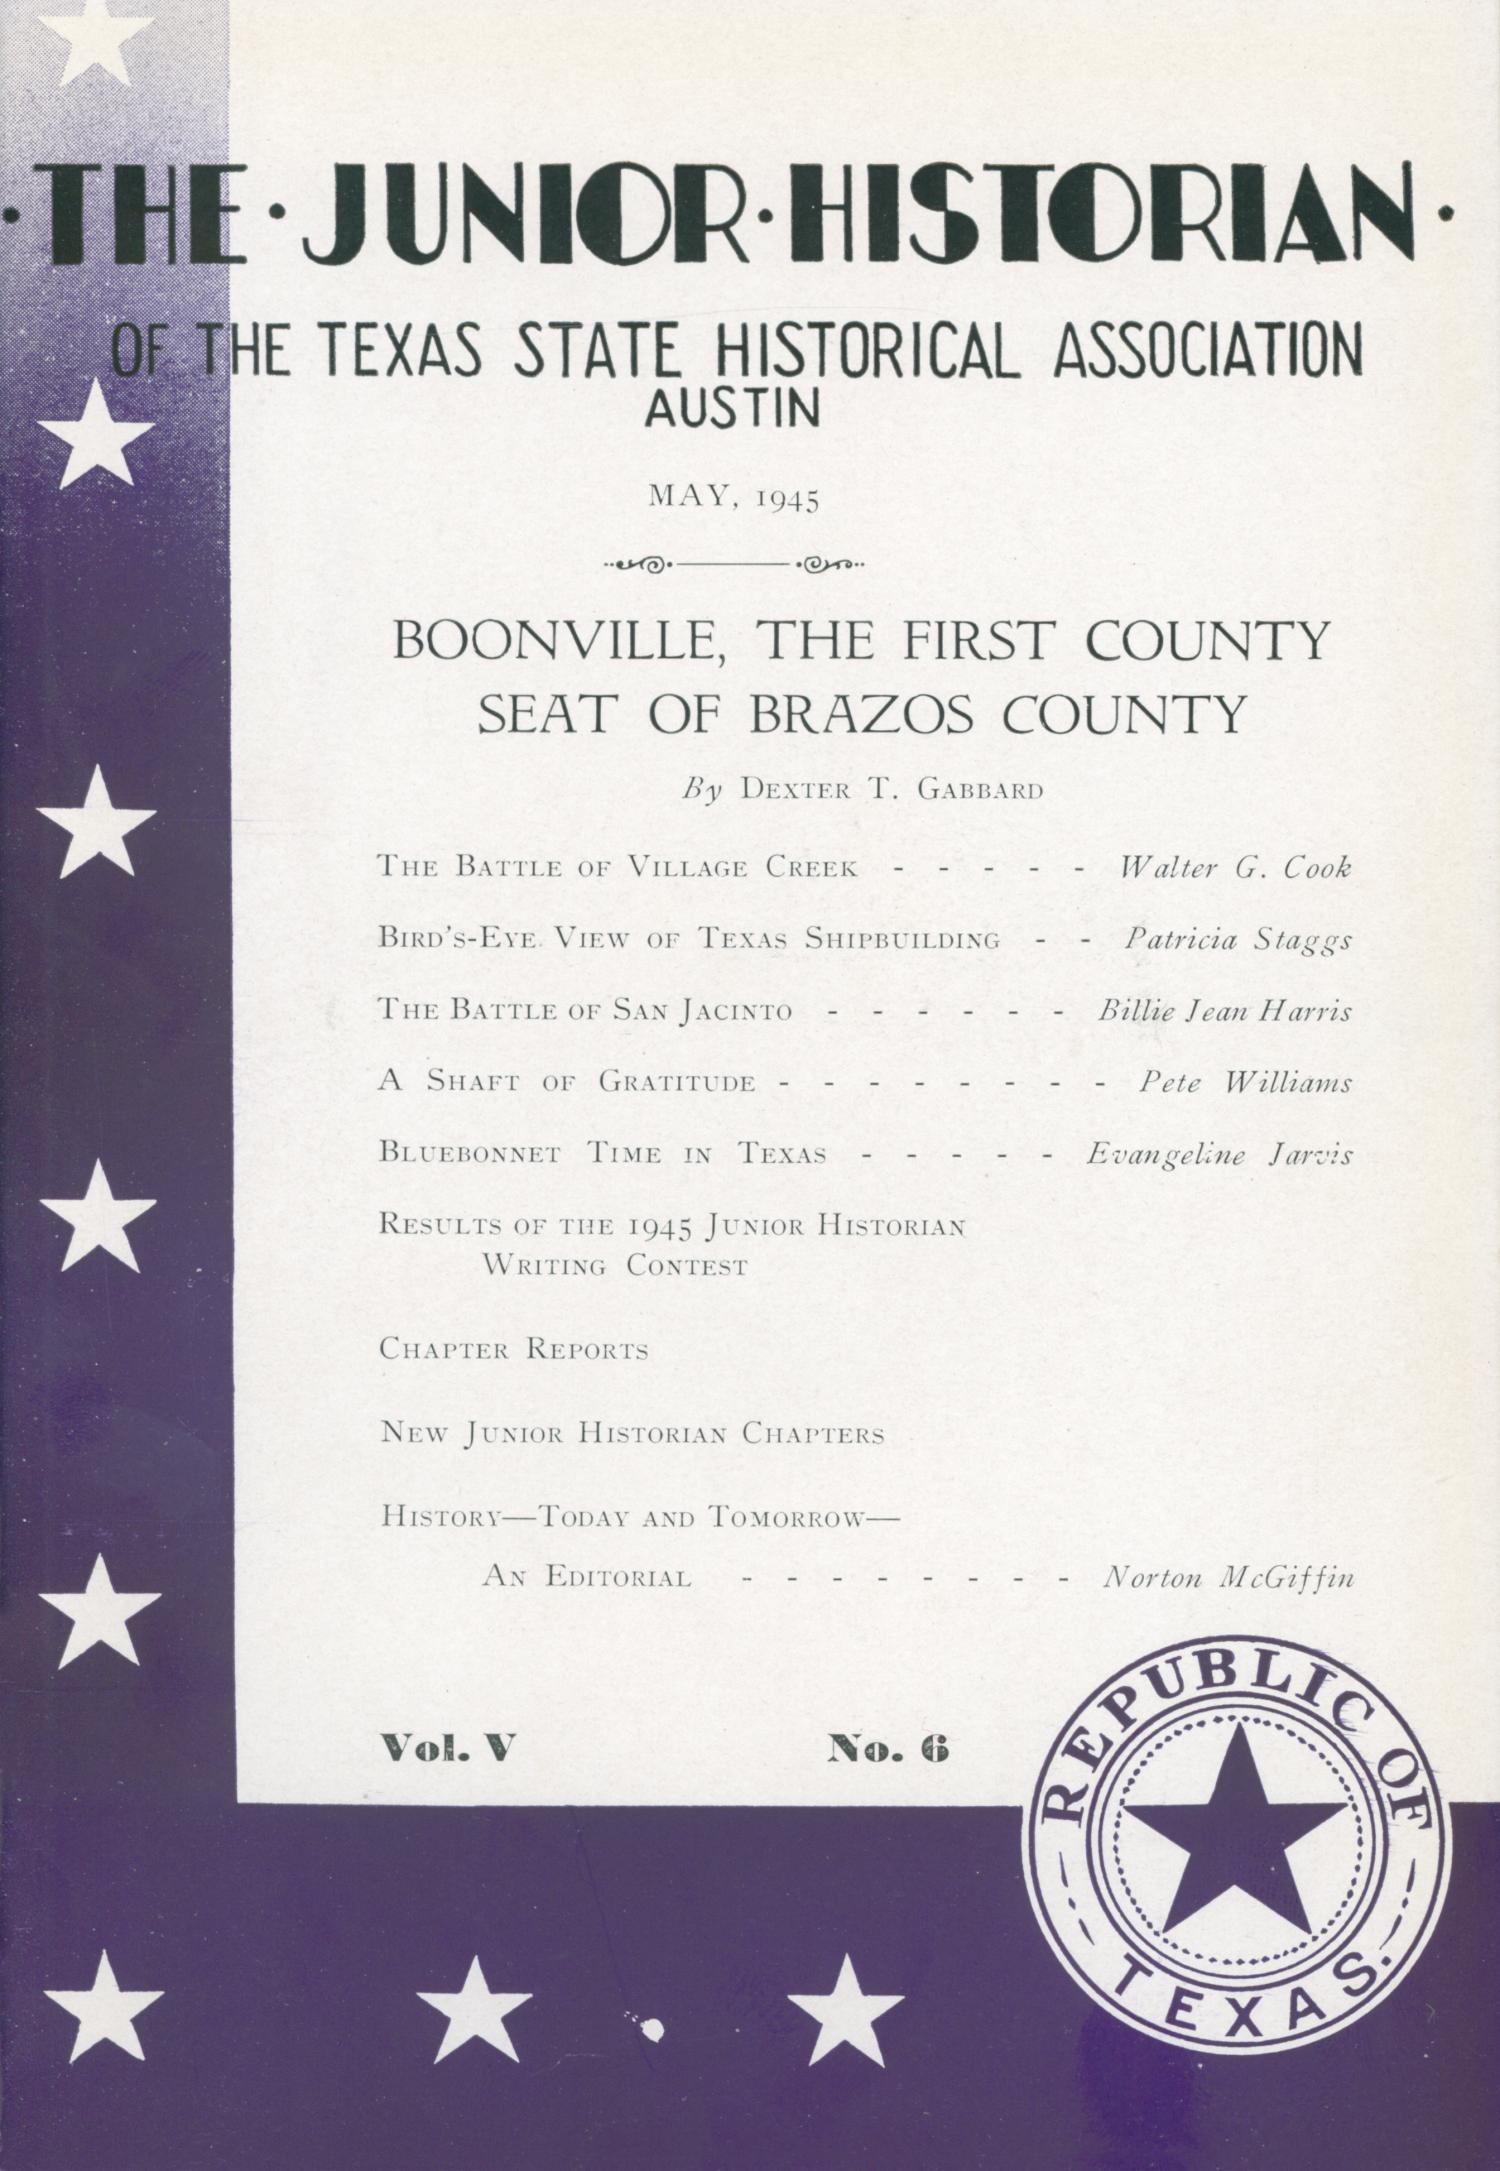 The Junior Historian, Volume 5, Number 6, May 1945
                                                
                                                    Front Cover
                                                